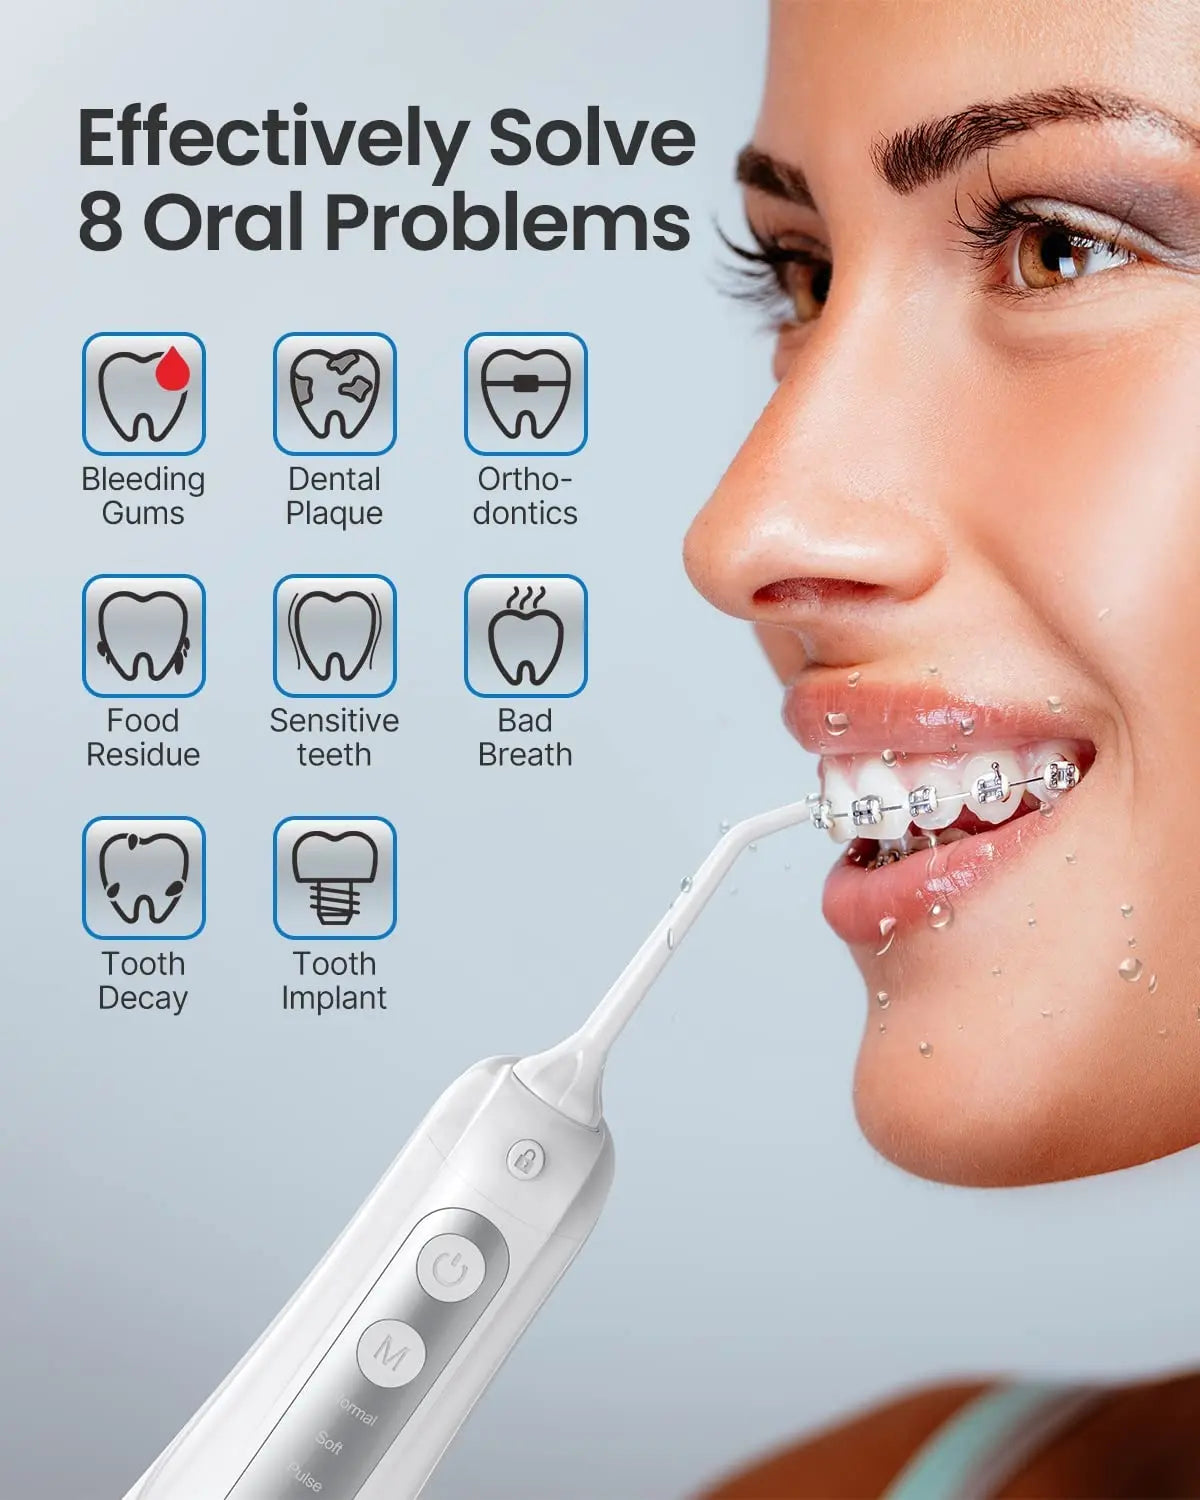 A person with braces uses a Renpho EU Cordless Water Flosser, with water droplets visible around their mouth. Text on the left reads "Effectively Solve 8 Oral Problems" with icons and labels: Bleeding Gums, Dental Plaque, Orthodontics, Food Residue, Sensitive Teeth, Bad Breath, Tooth Decay, Tooth Implant. The Renpho EU Cordless Water Flosser features high pressure water jet